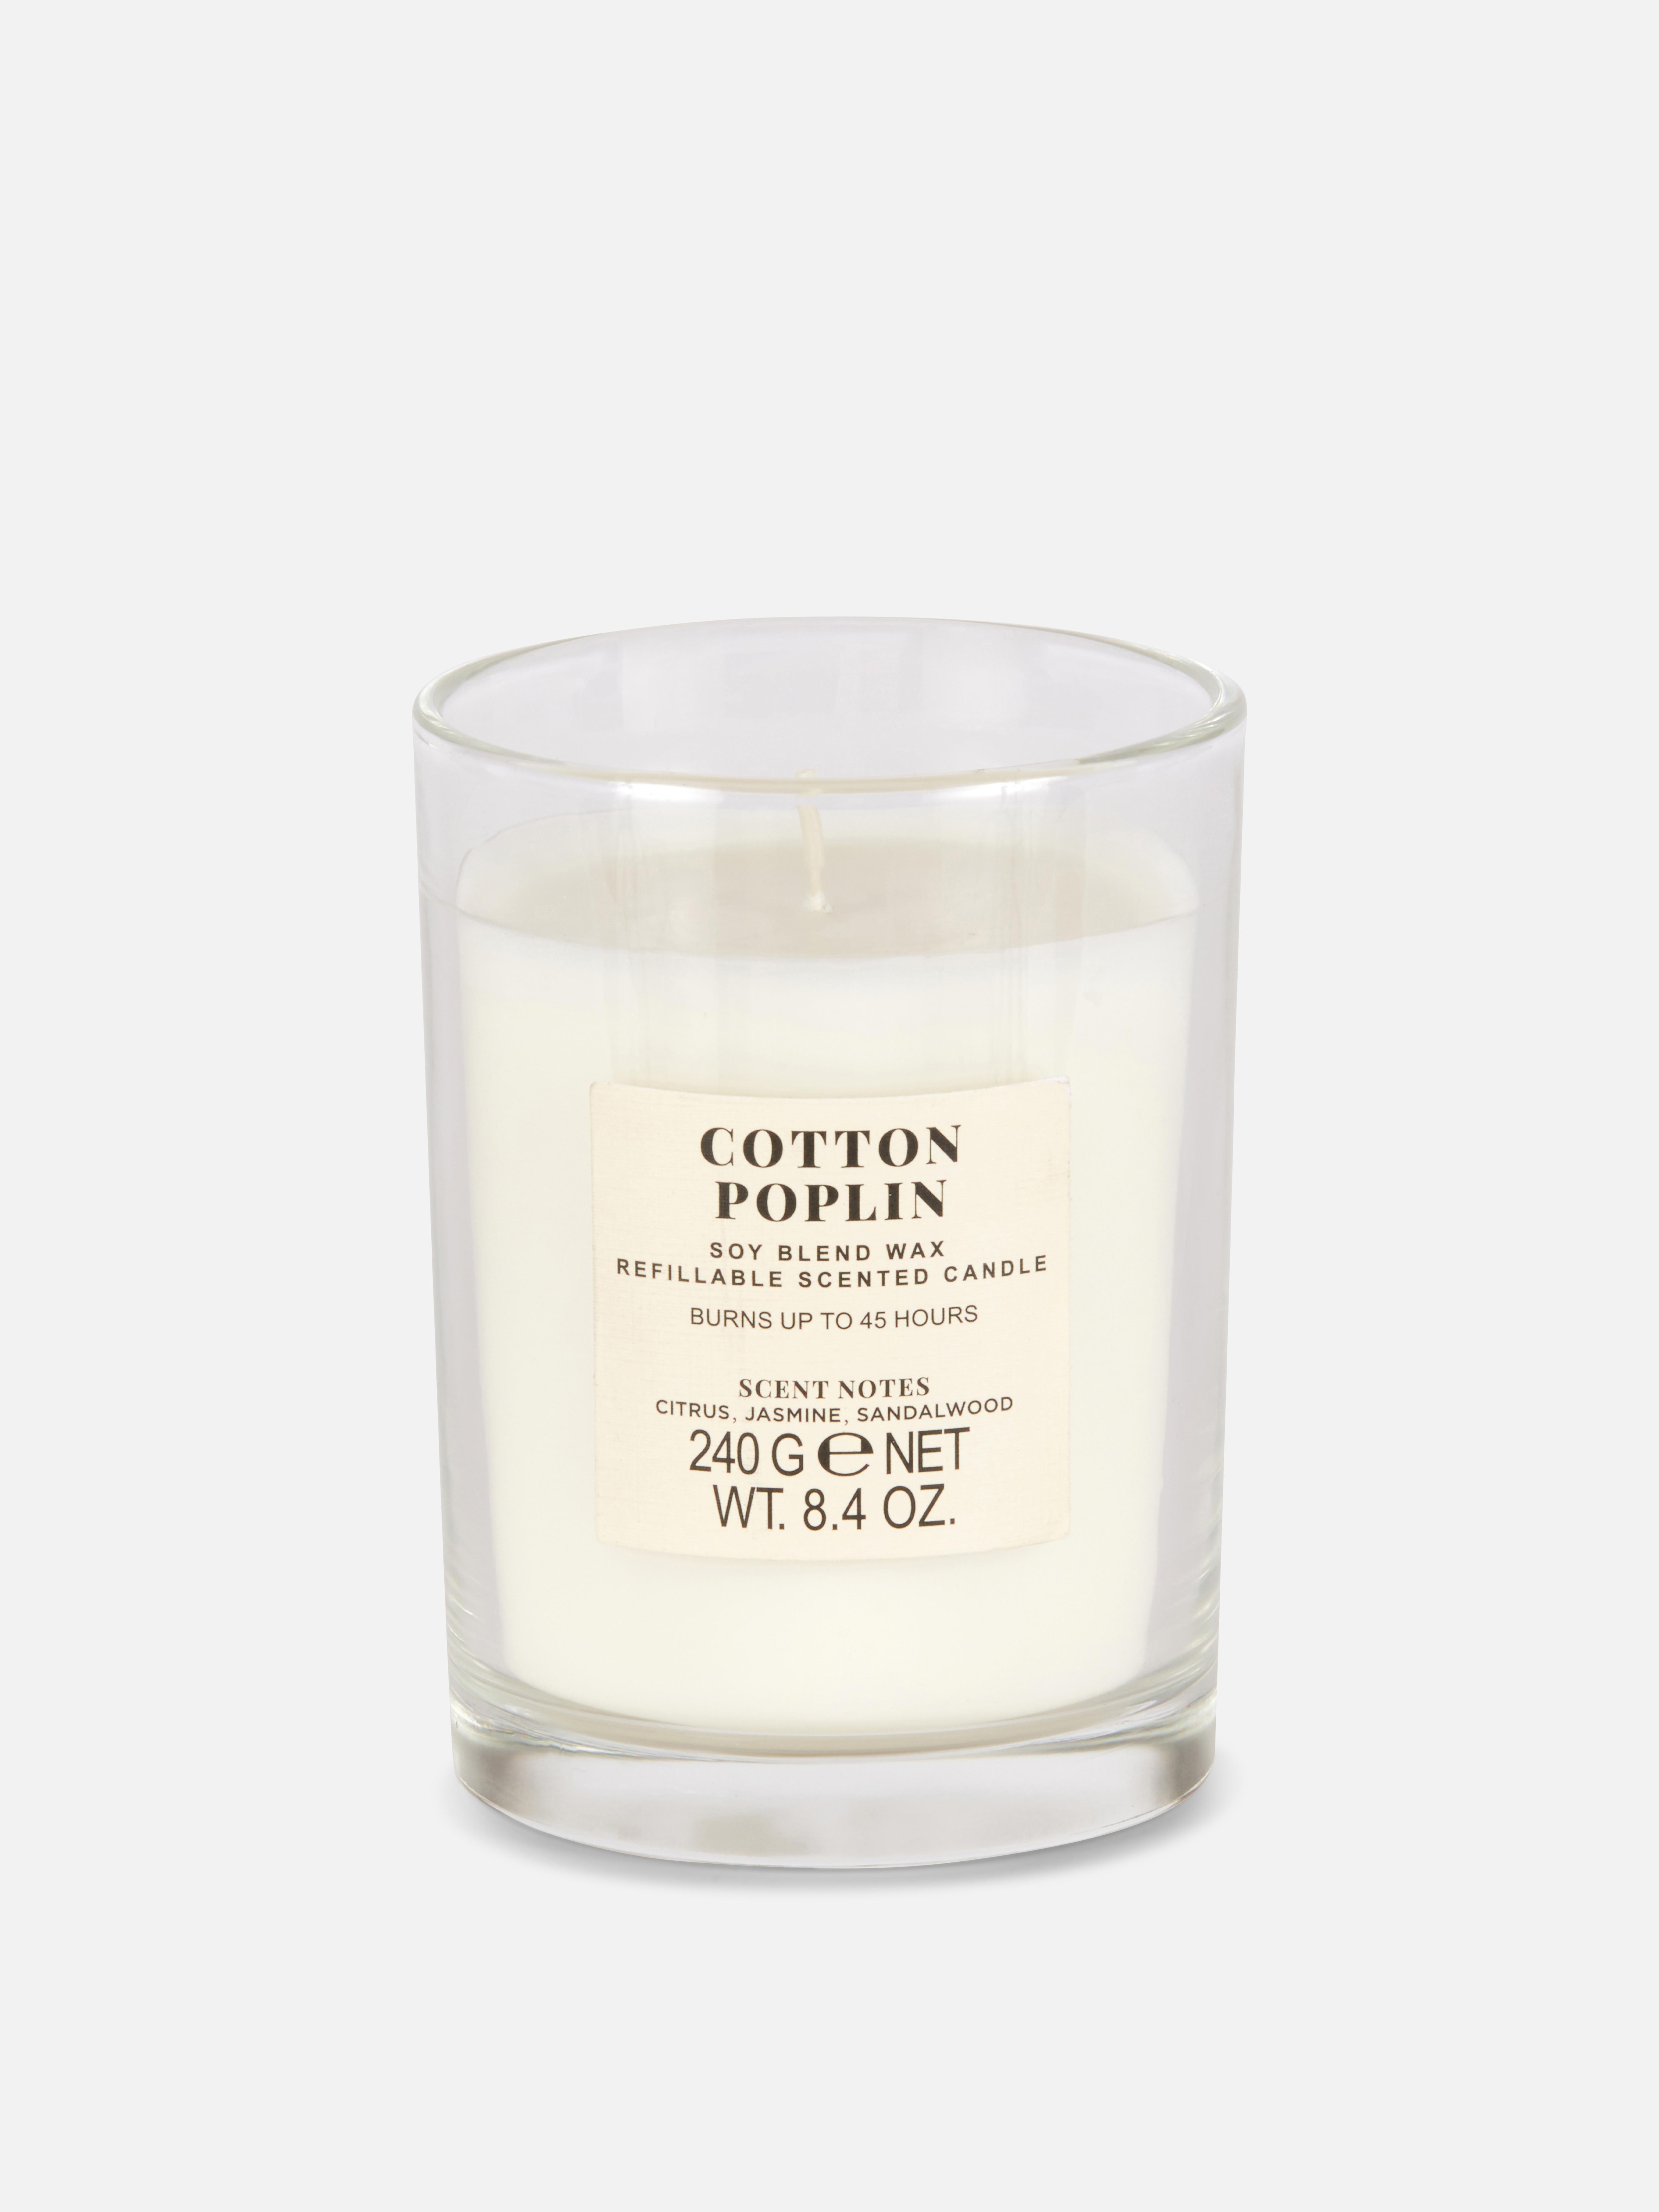 Refillable Scented Candle